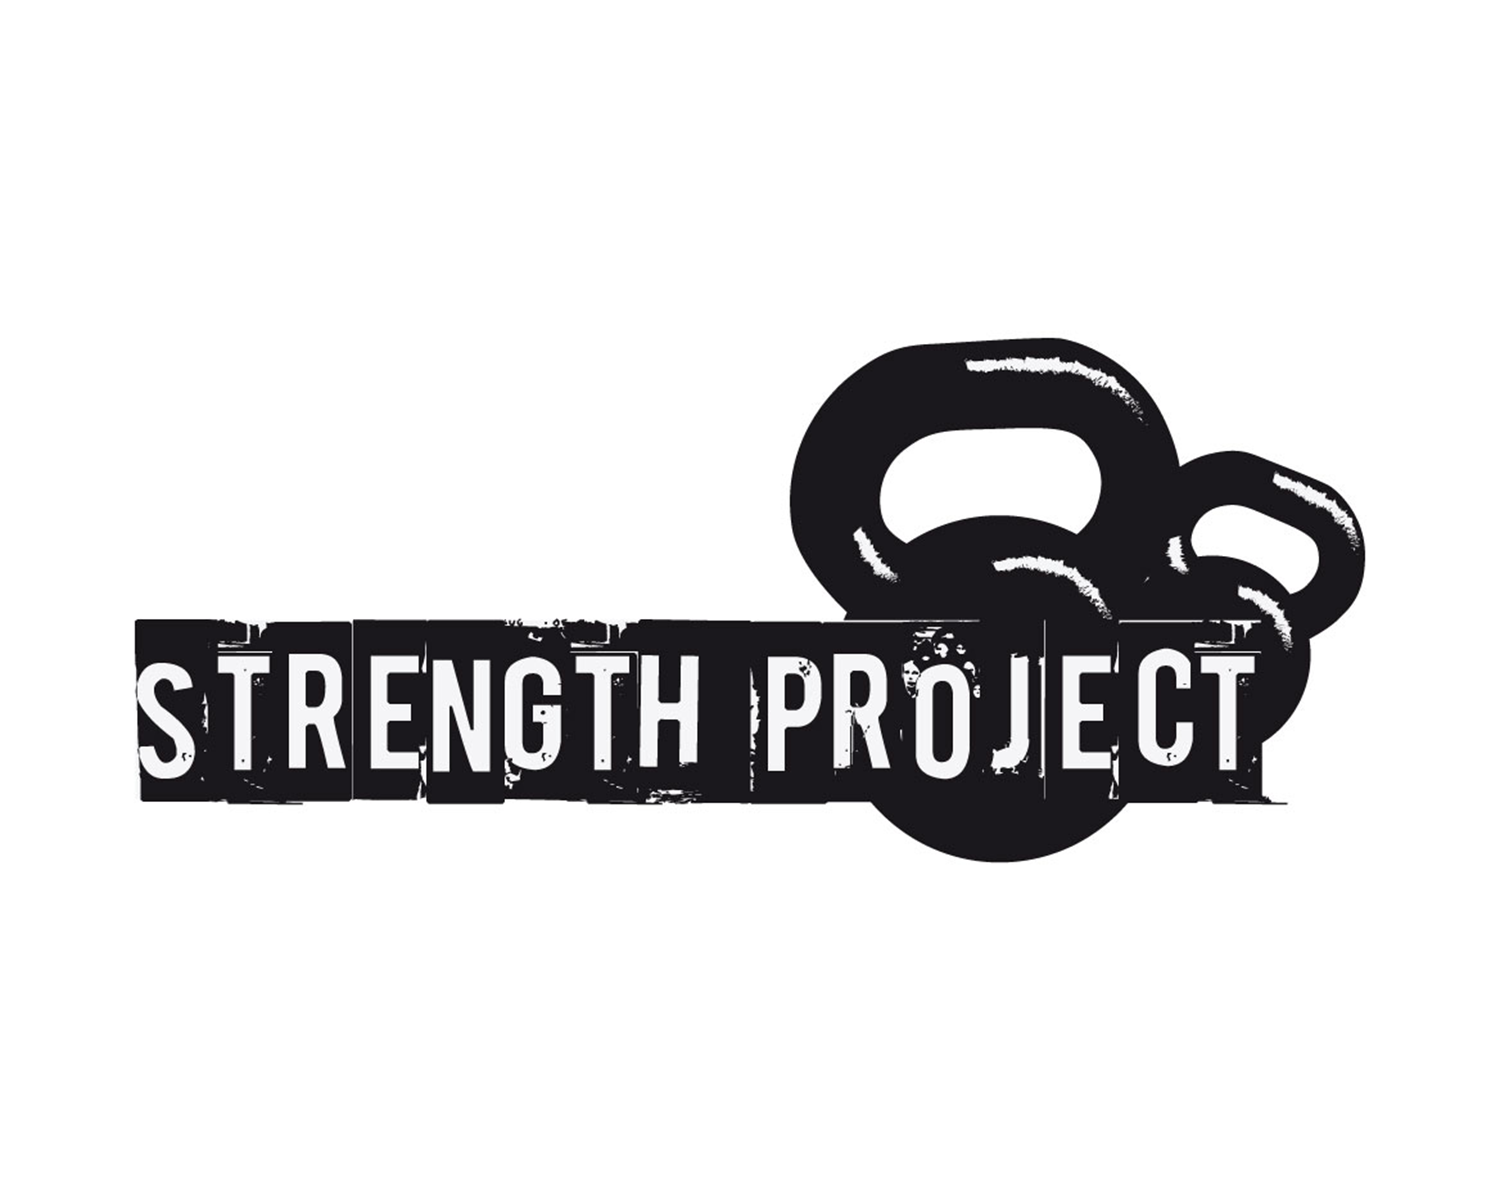 Strenght project, personal trainers logo